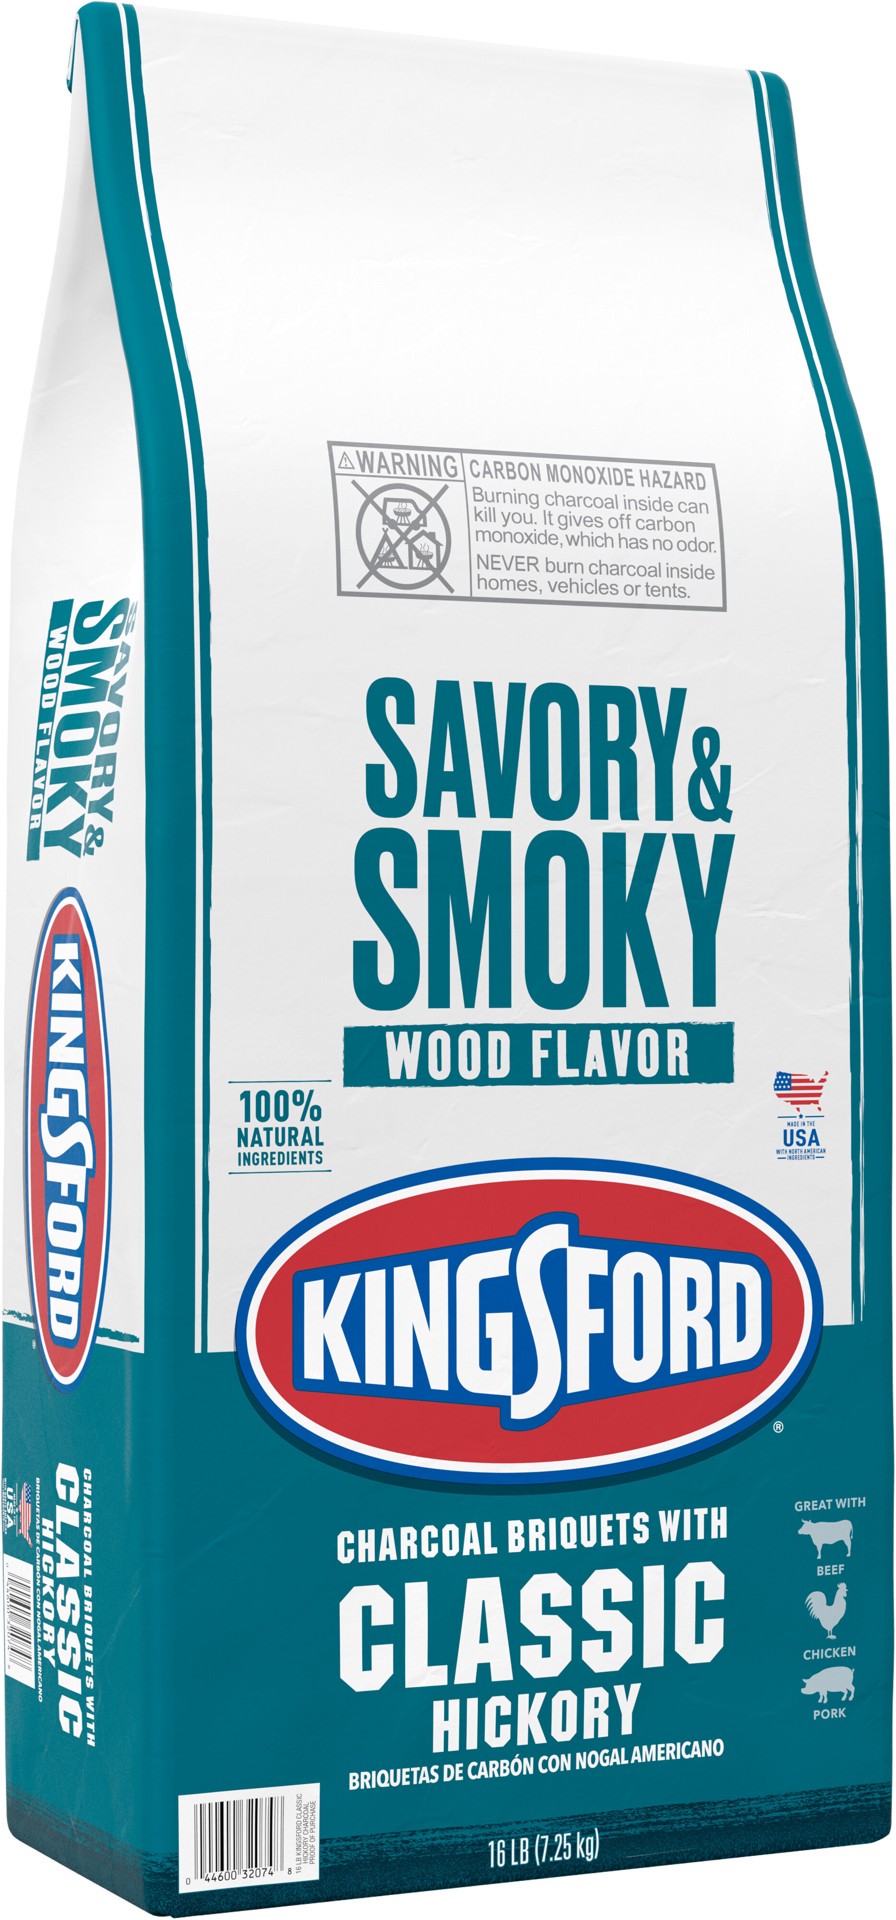 slide 3 of 5, Kingsford Charcoal with Classic Hickory Briquettes, 16 lb